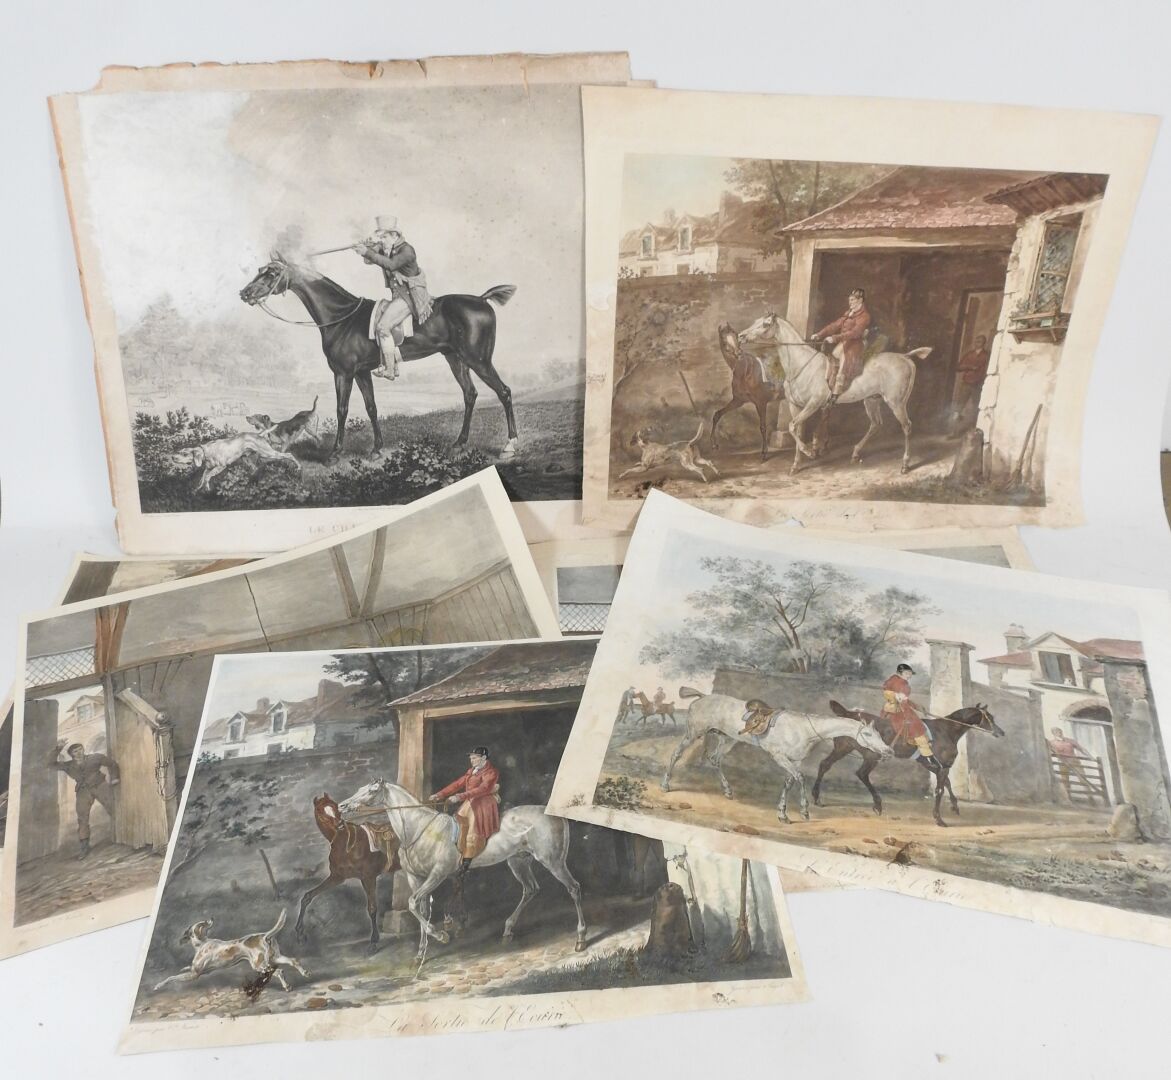 Null Carle VERNET (1758-1836) after.

Set of eight engravings in colors by Jean-&hellip;